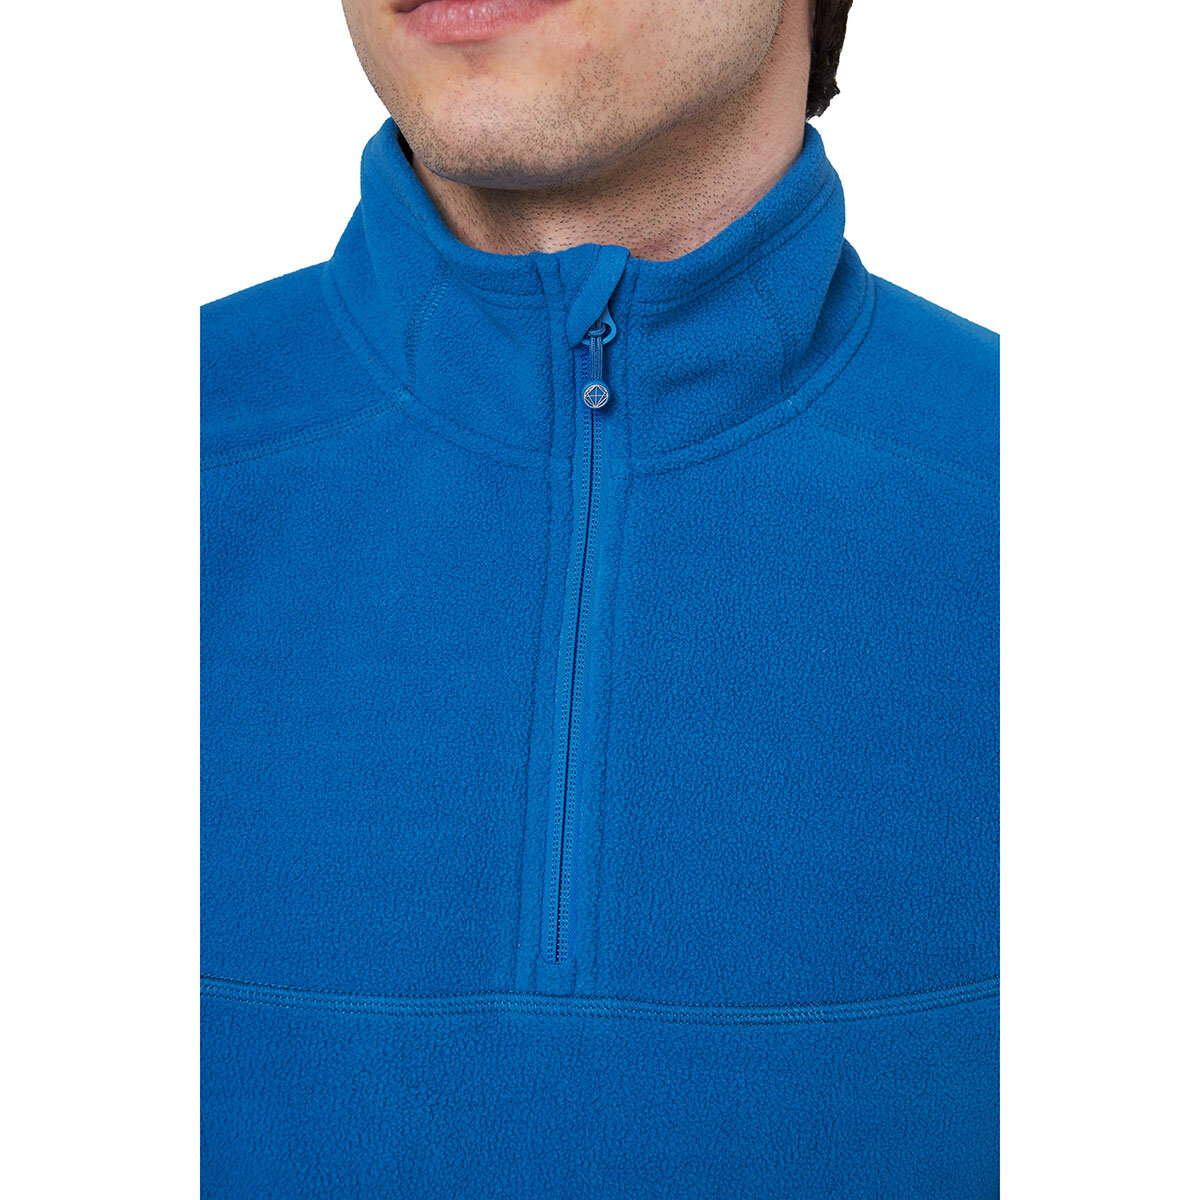 BC Clothing Fleece Lined Hoody in 3 Colours and 4 Sizes